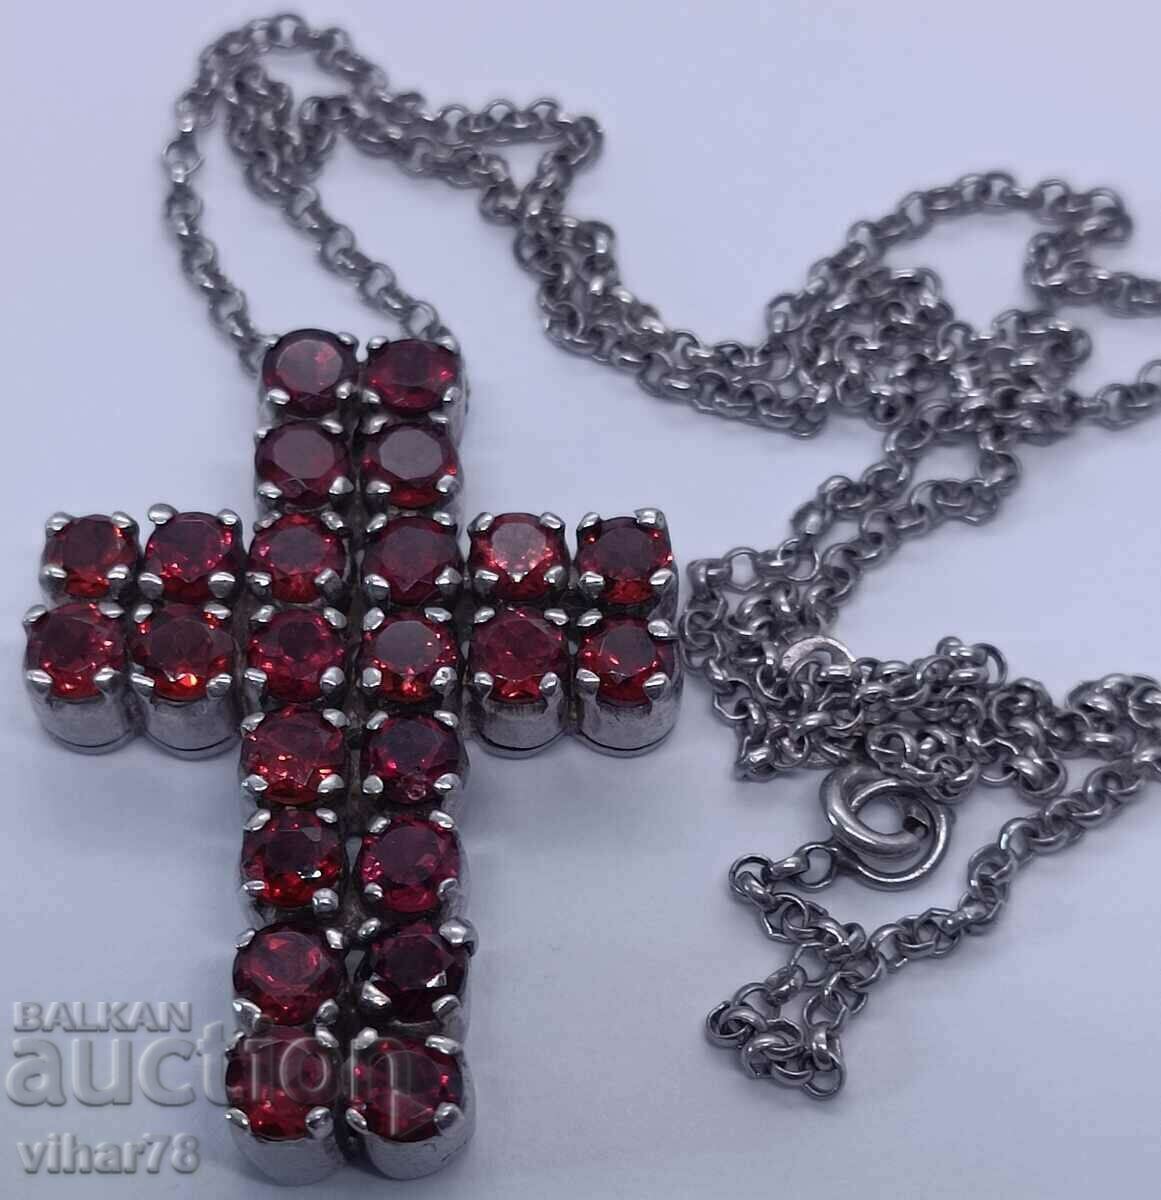 Silver cross studded with grenades - only by personal delivery